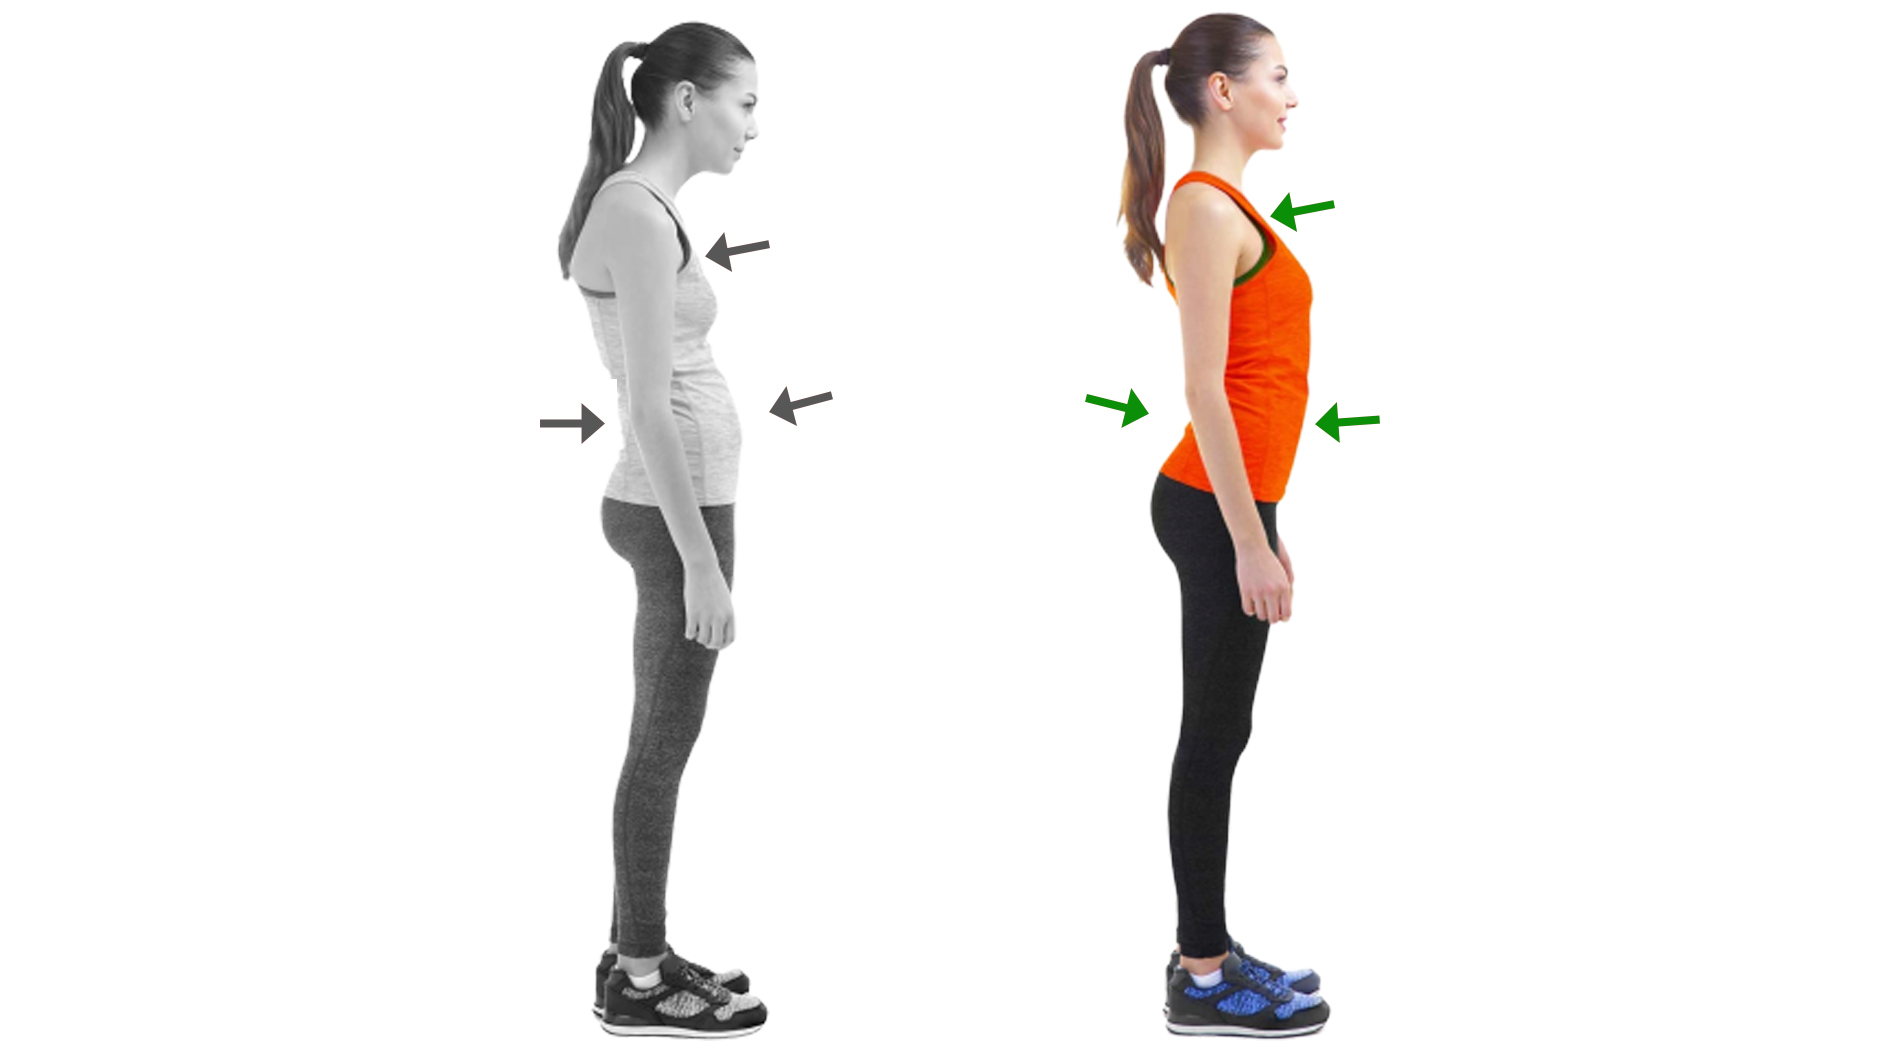 How to achieve perfect posture? - My, Posture, Back, Exercises, Health, Spine, Gait, beauty, Stoop